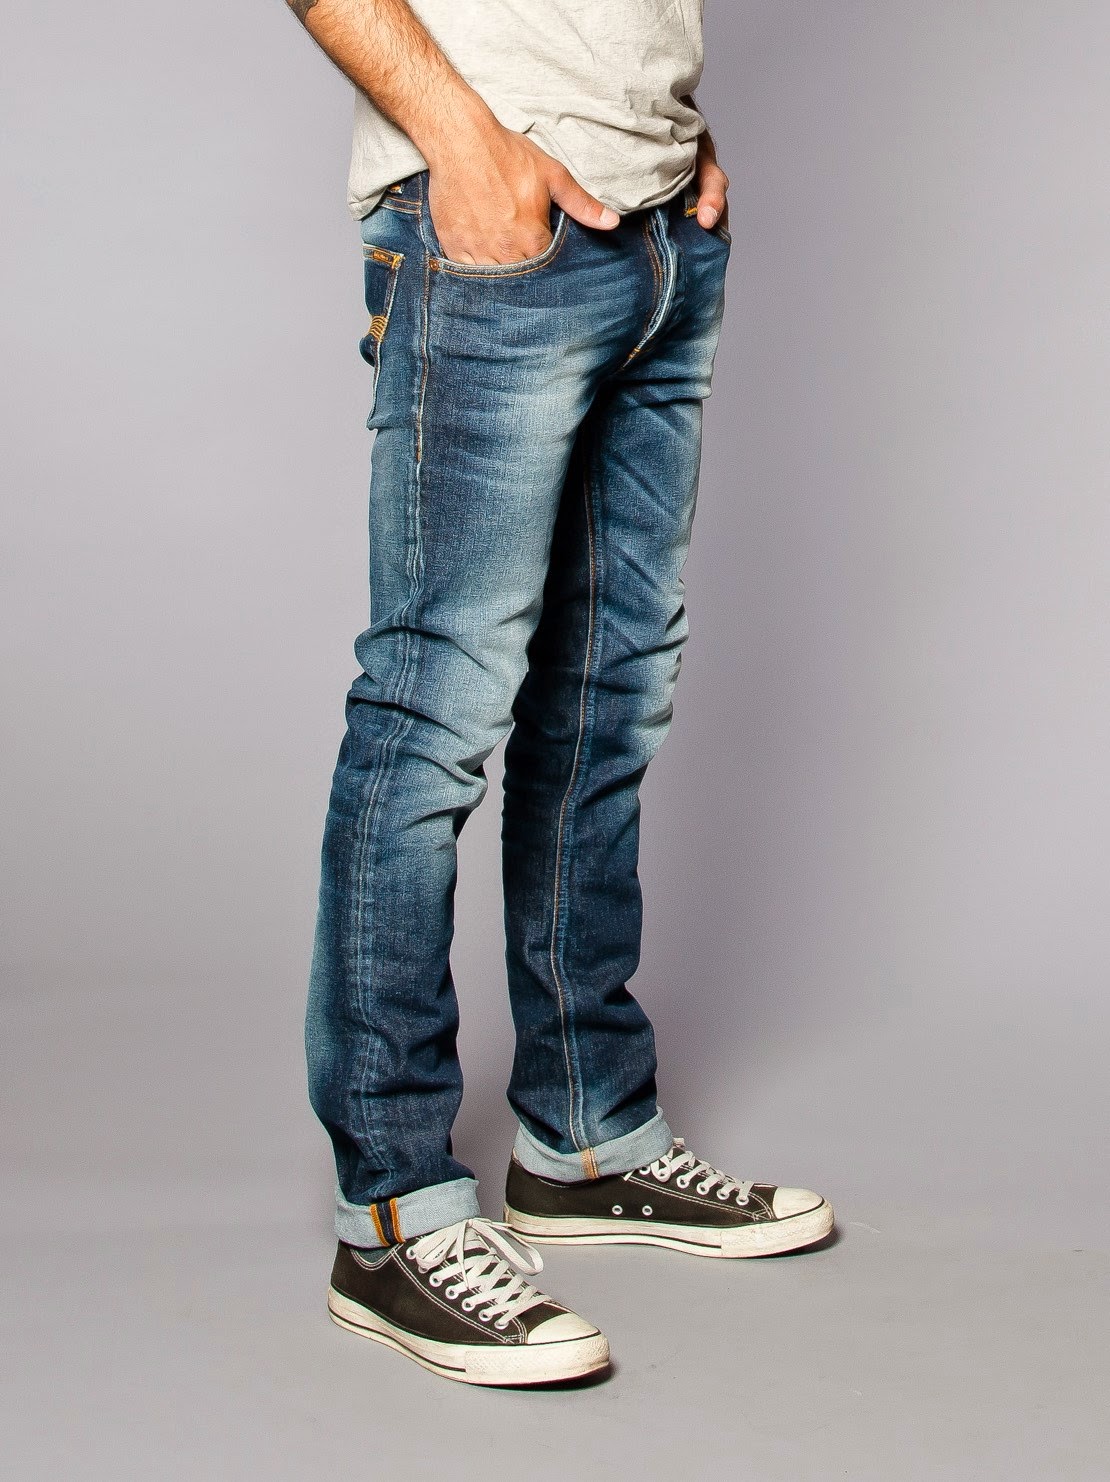 consciously sartorial: Nudie Jeans Co. - smart jeans for the conscious gent